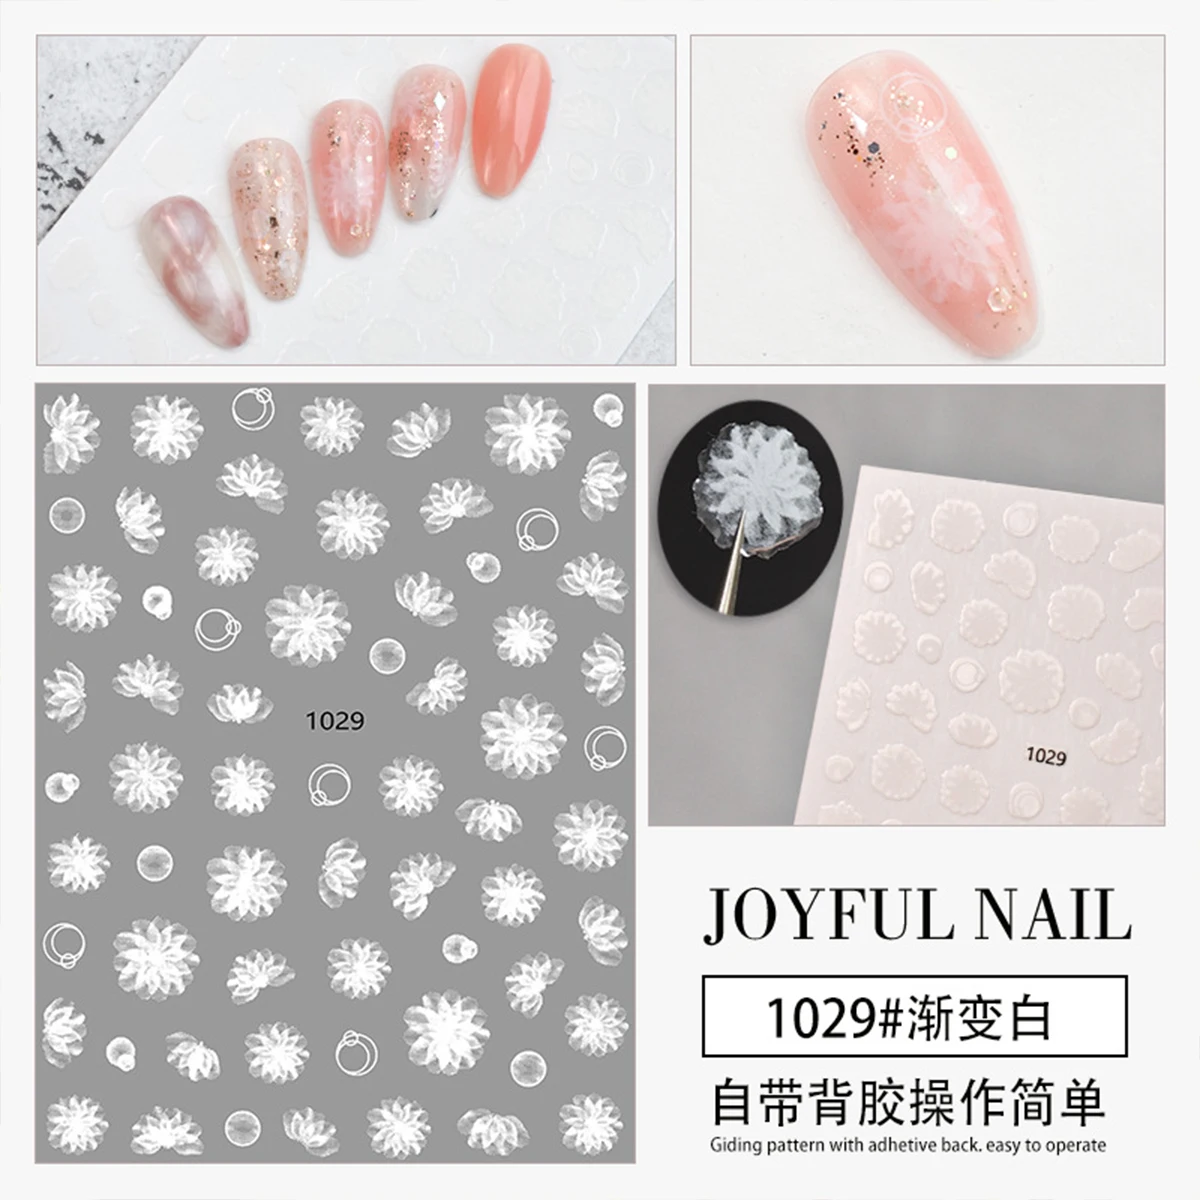 

10PCS New Nail Stickers Embossed Gradient White Flowers Cute Ribbon Textured Nail Decoration Decal 3D Adhesive Slider